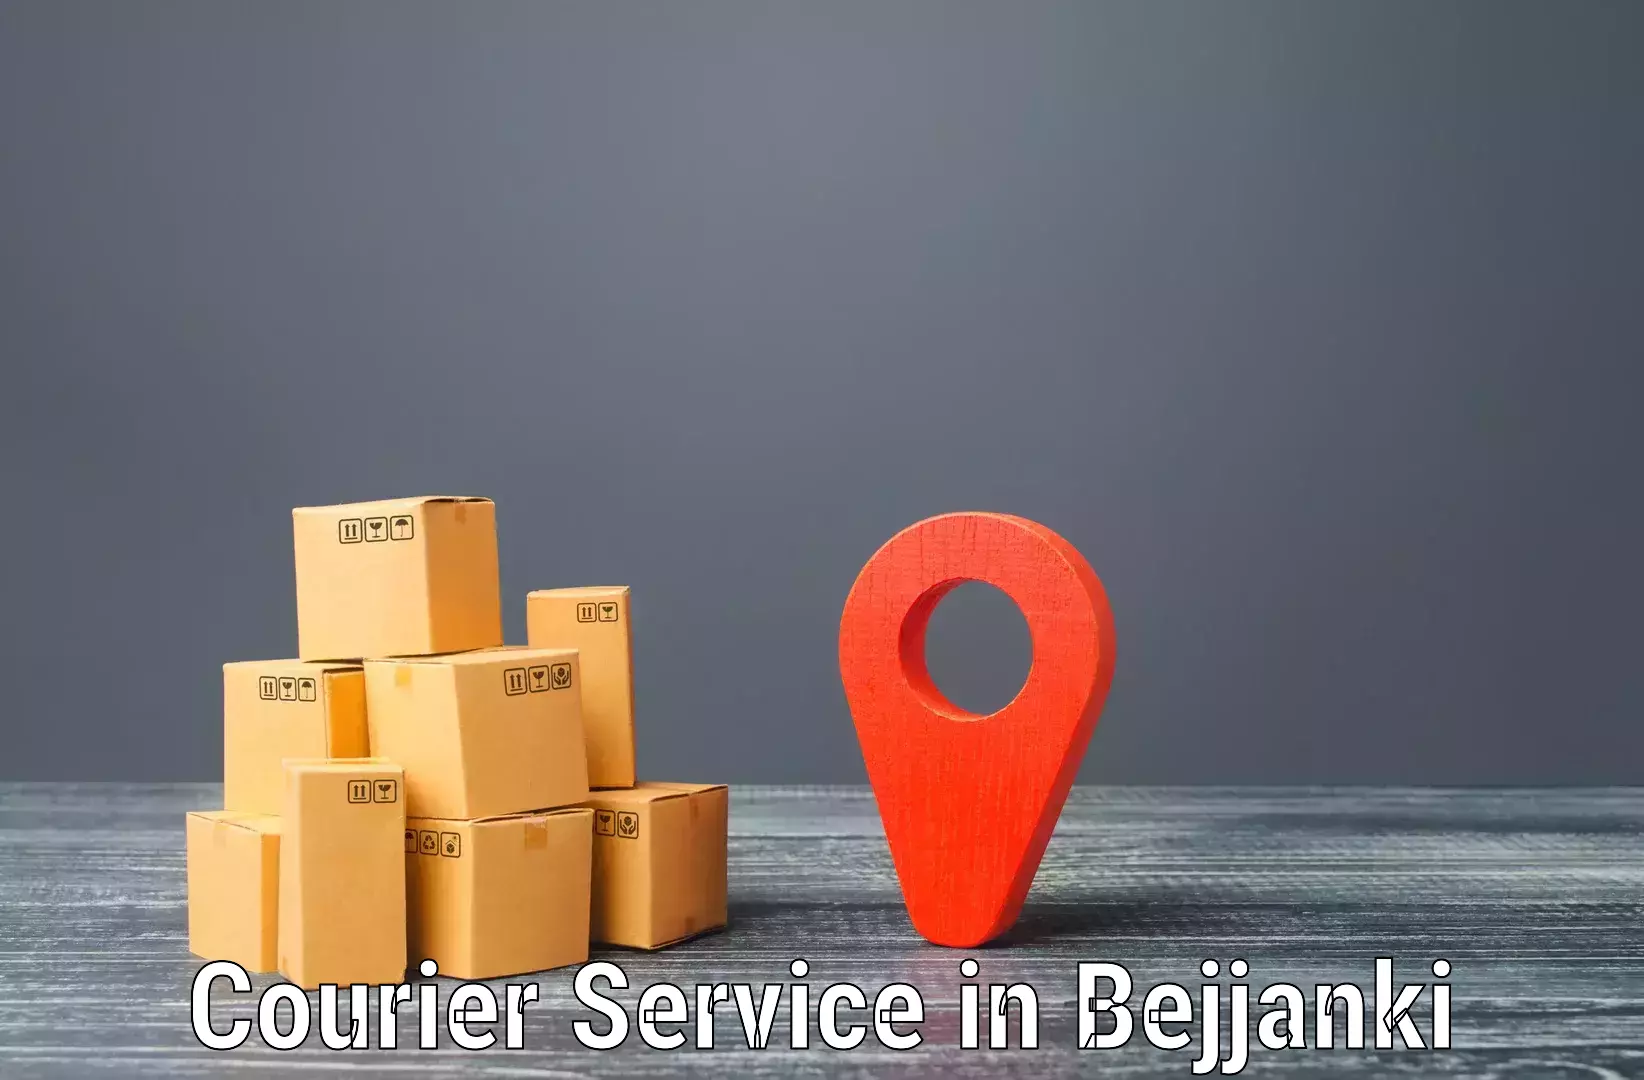 State-of-the-art courier technology in Bejjanki